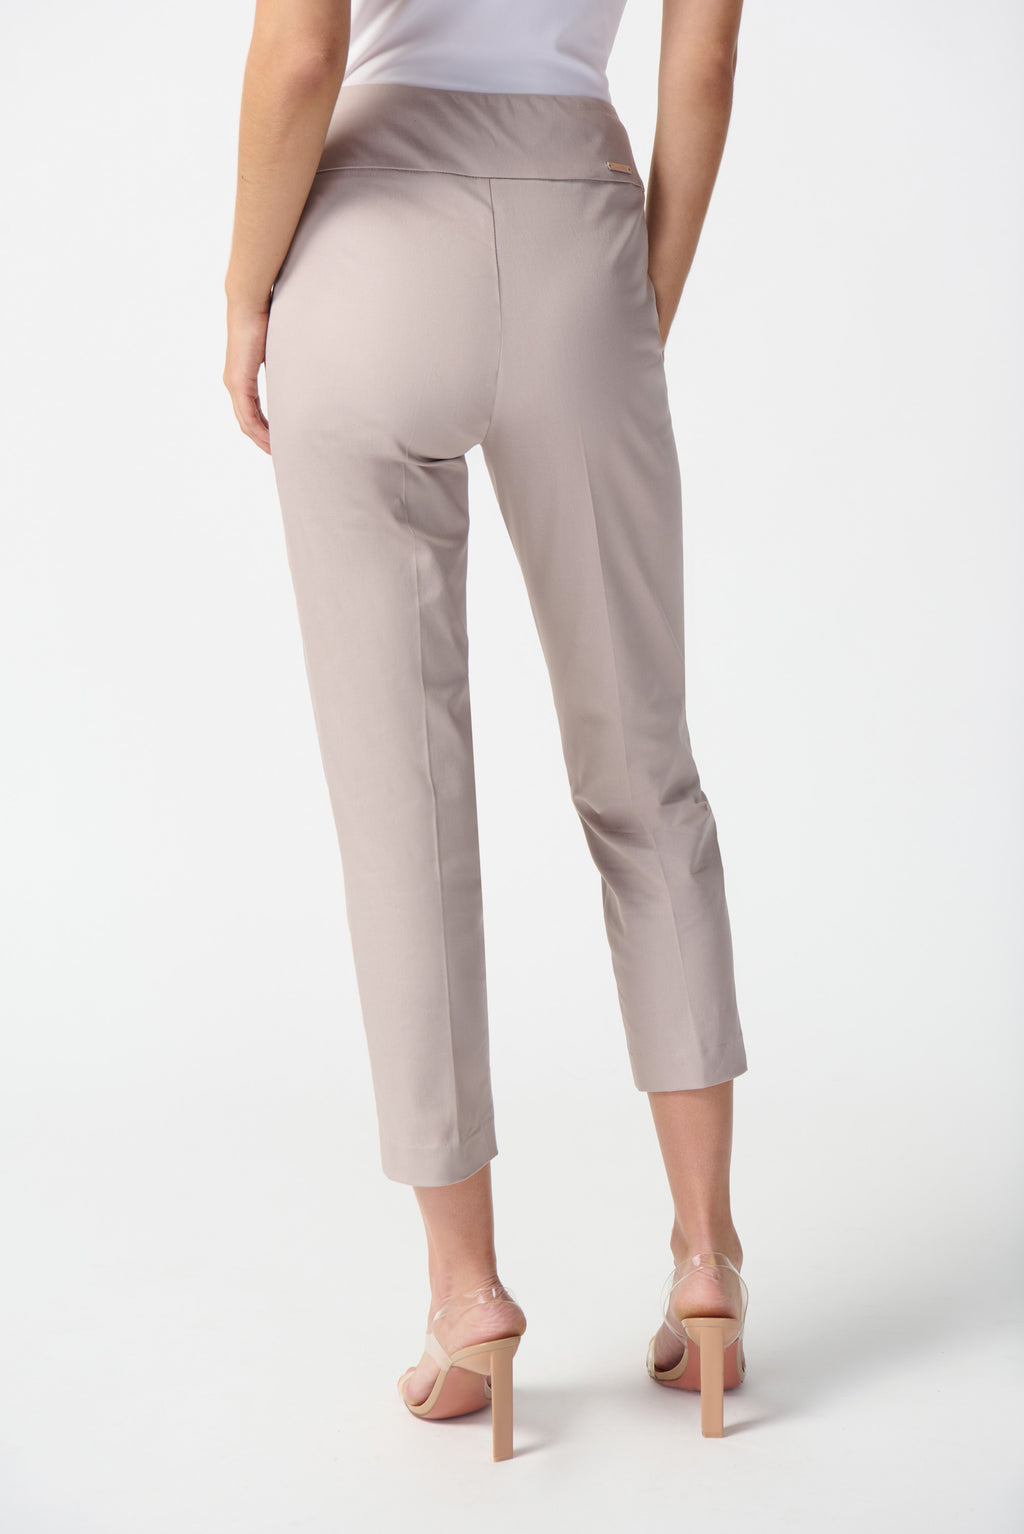 Joseph Ribkoff Taupe Cropped Pull-On Pants Style 242240